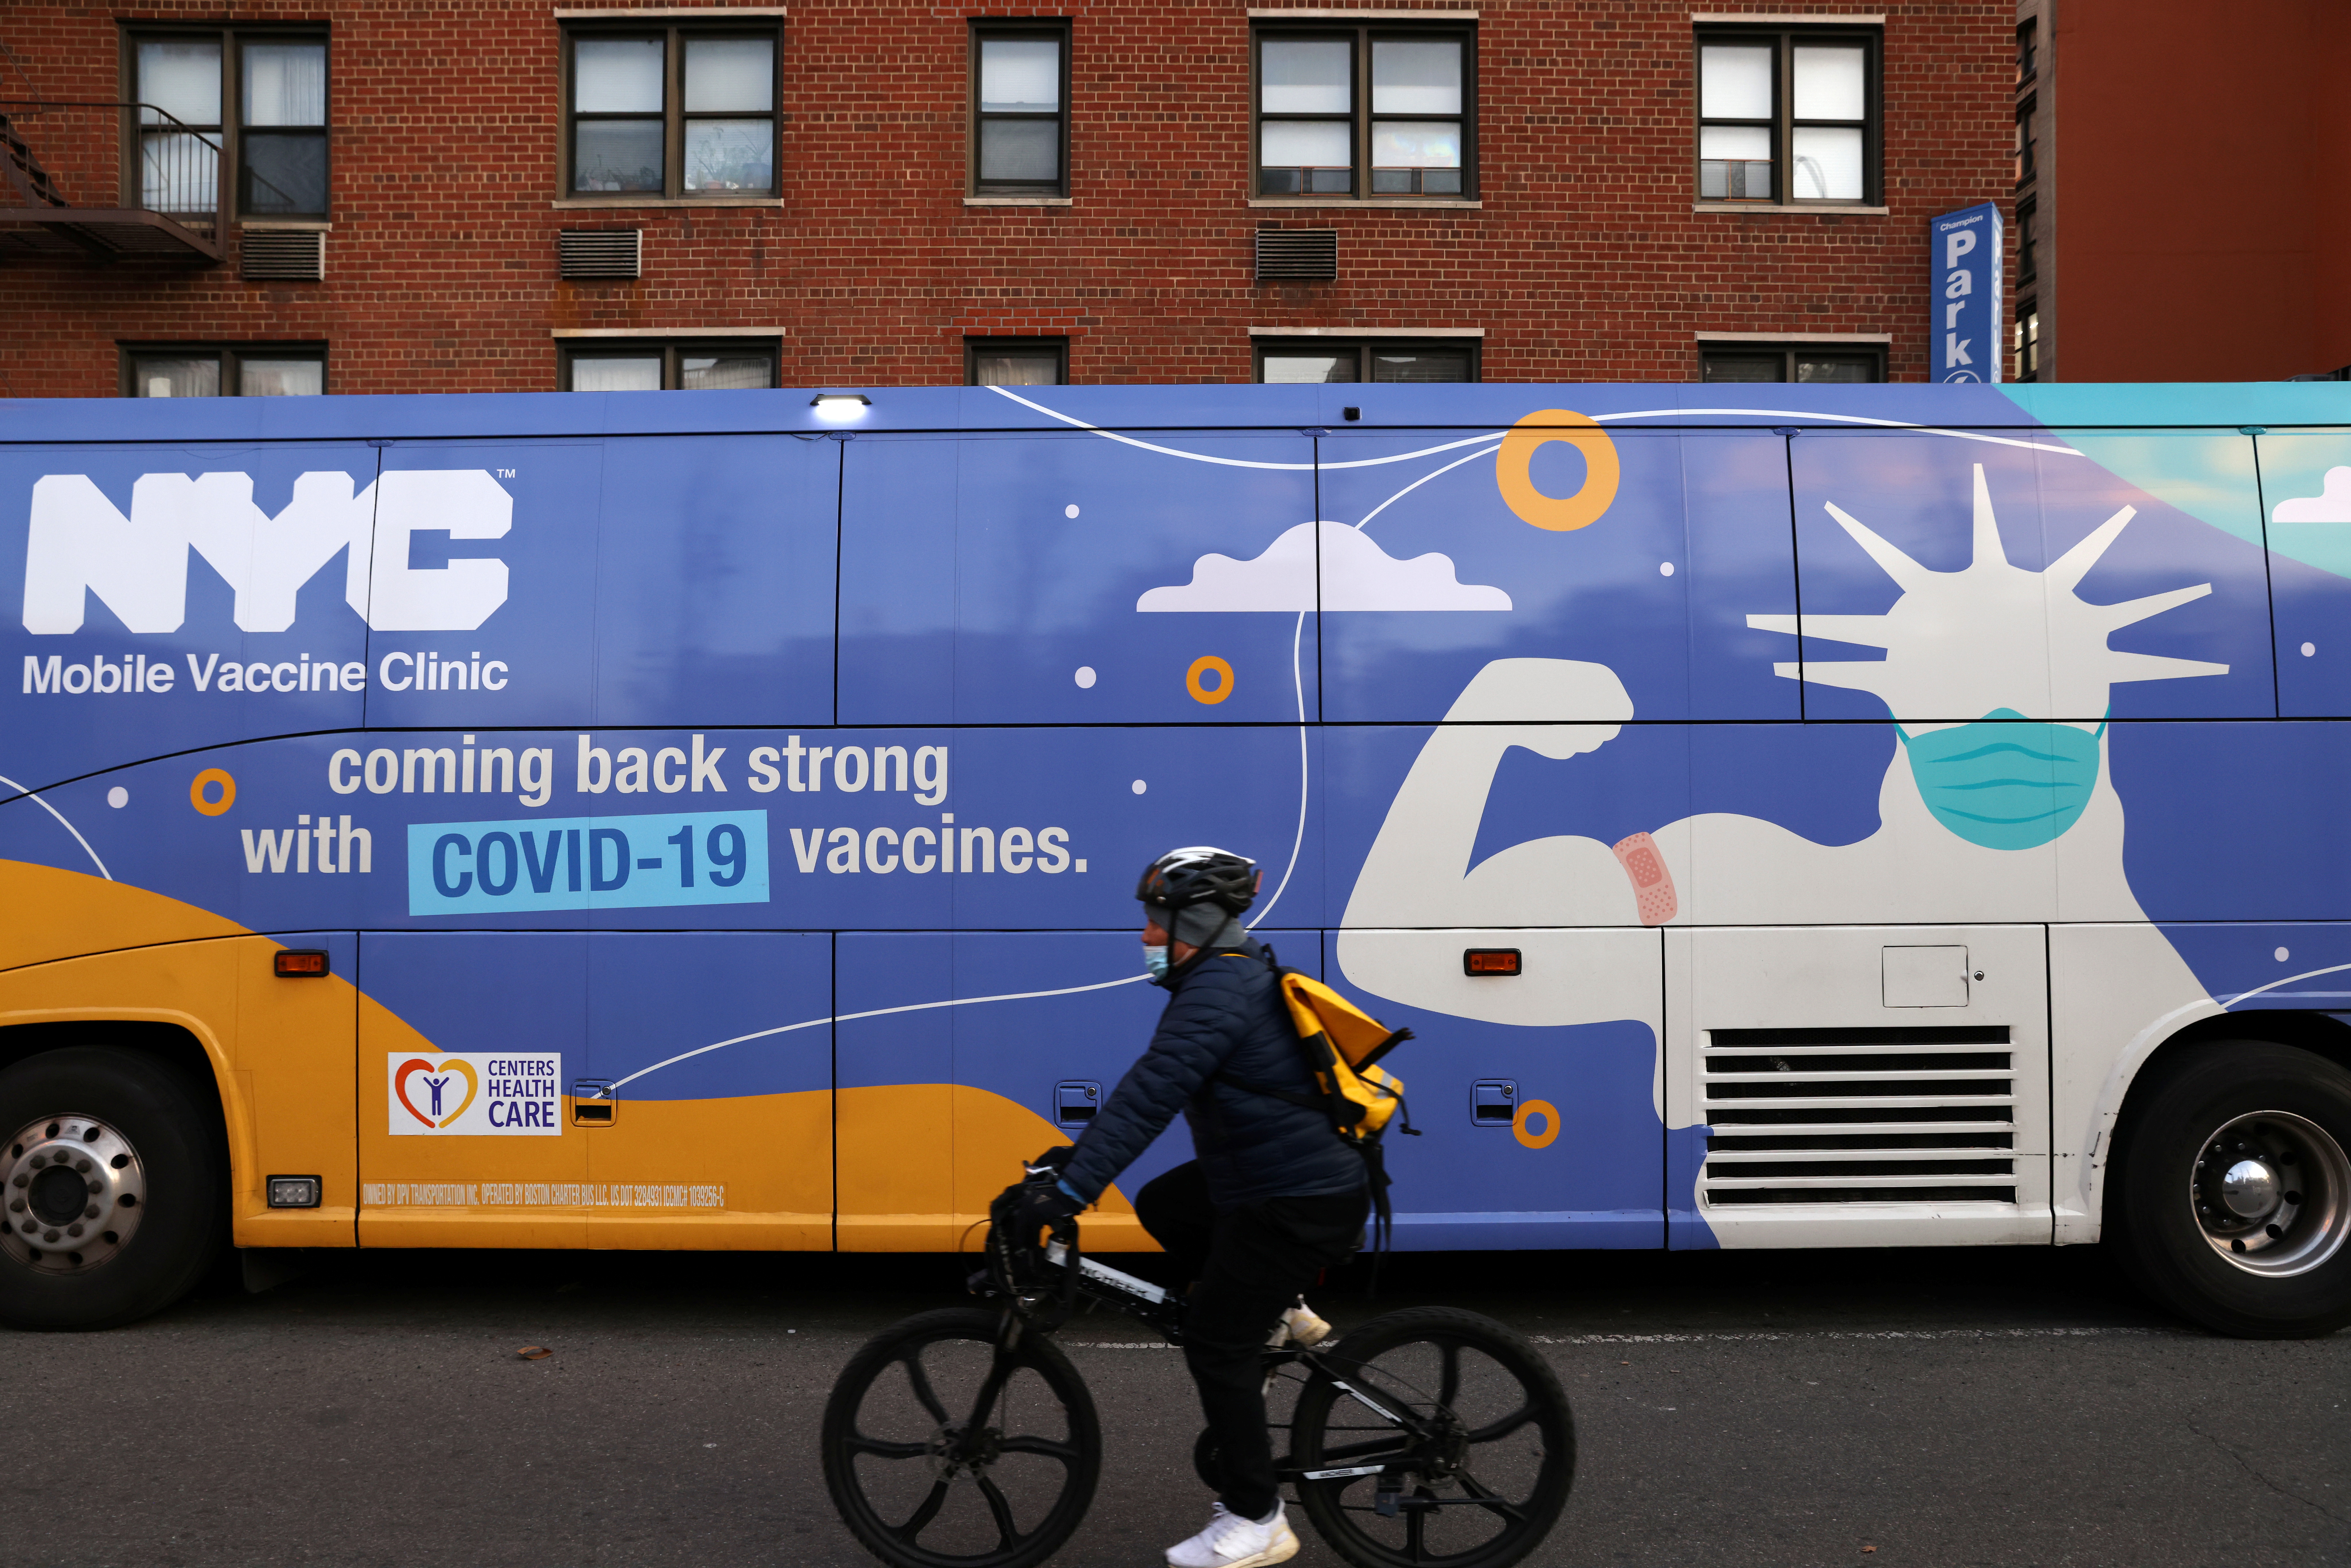 A person rides past a mobile coronavirus disease (COVID-19) vaccine clinic during the spread of the Omicron coronavirus variant in Manhattan